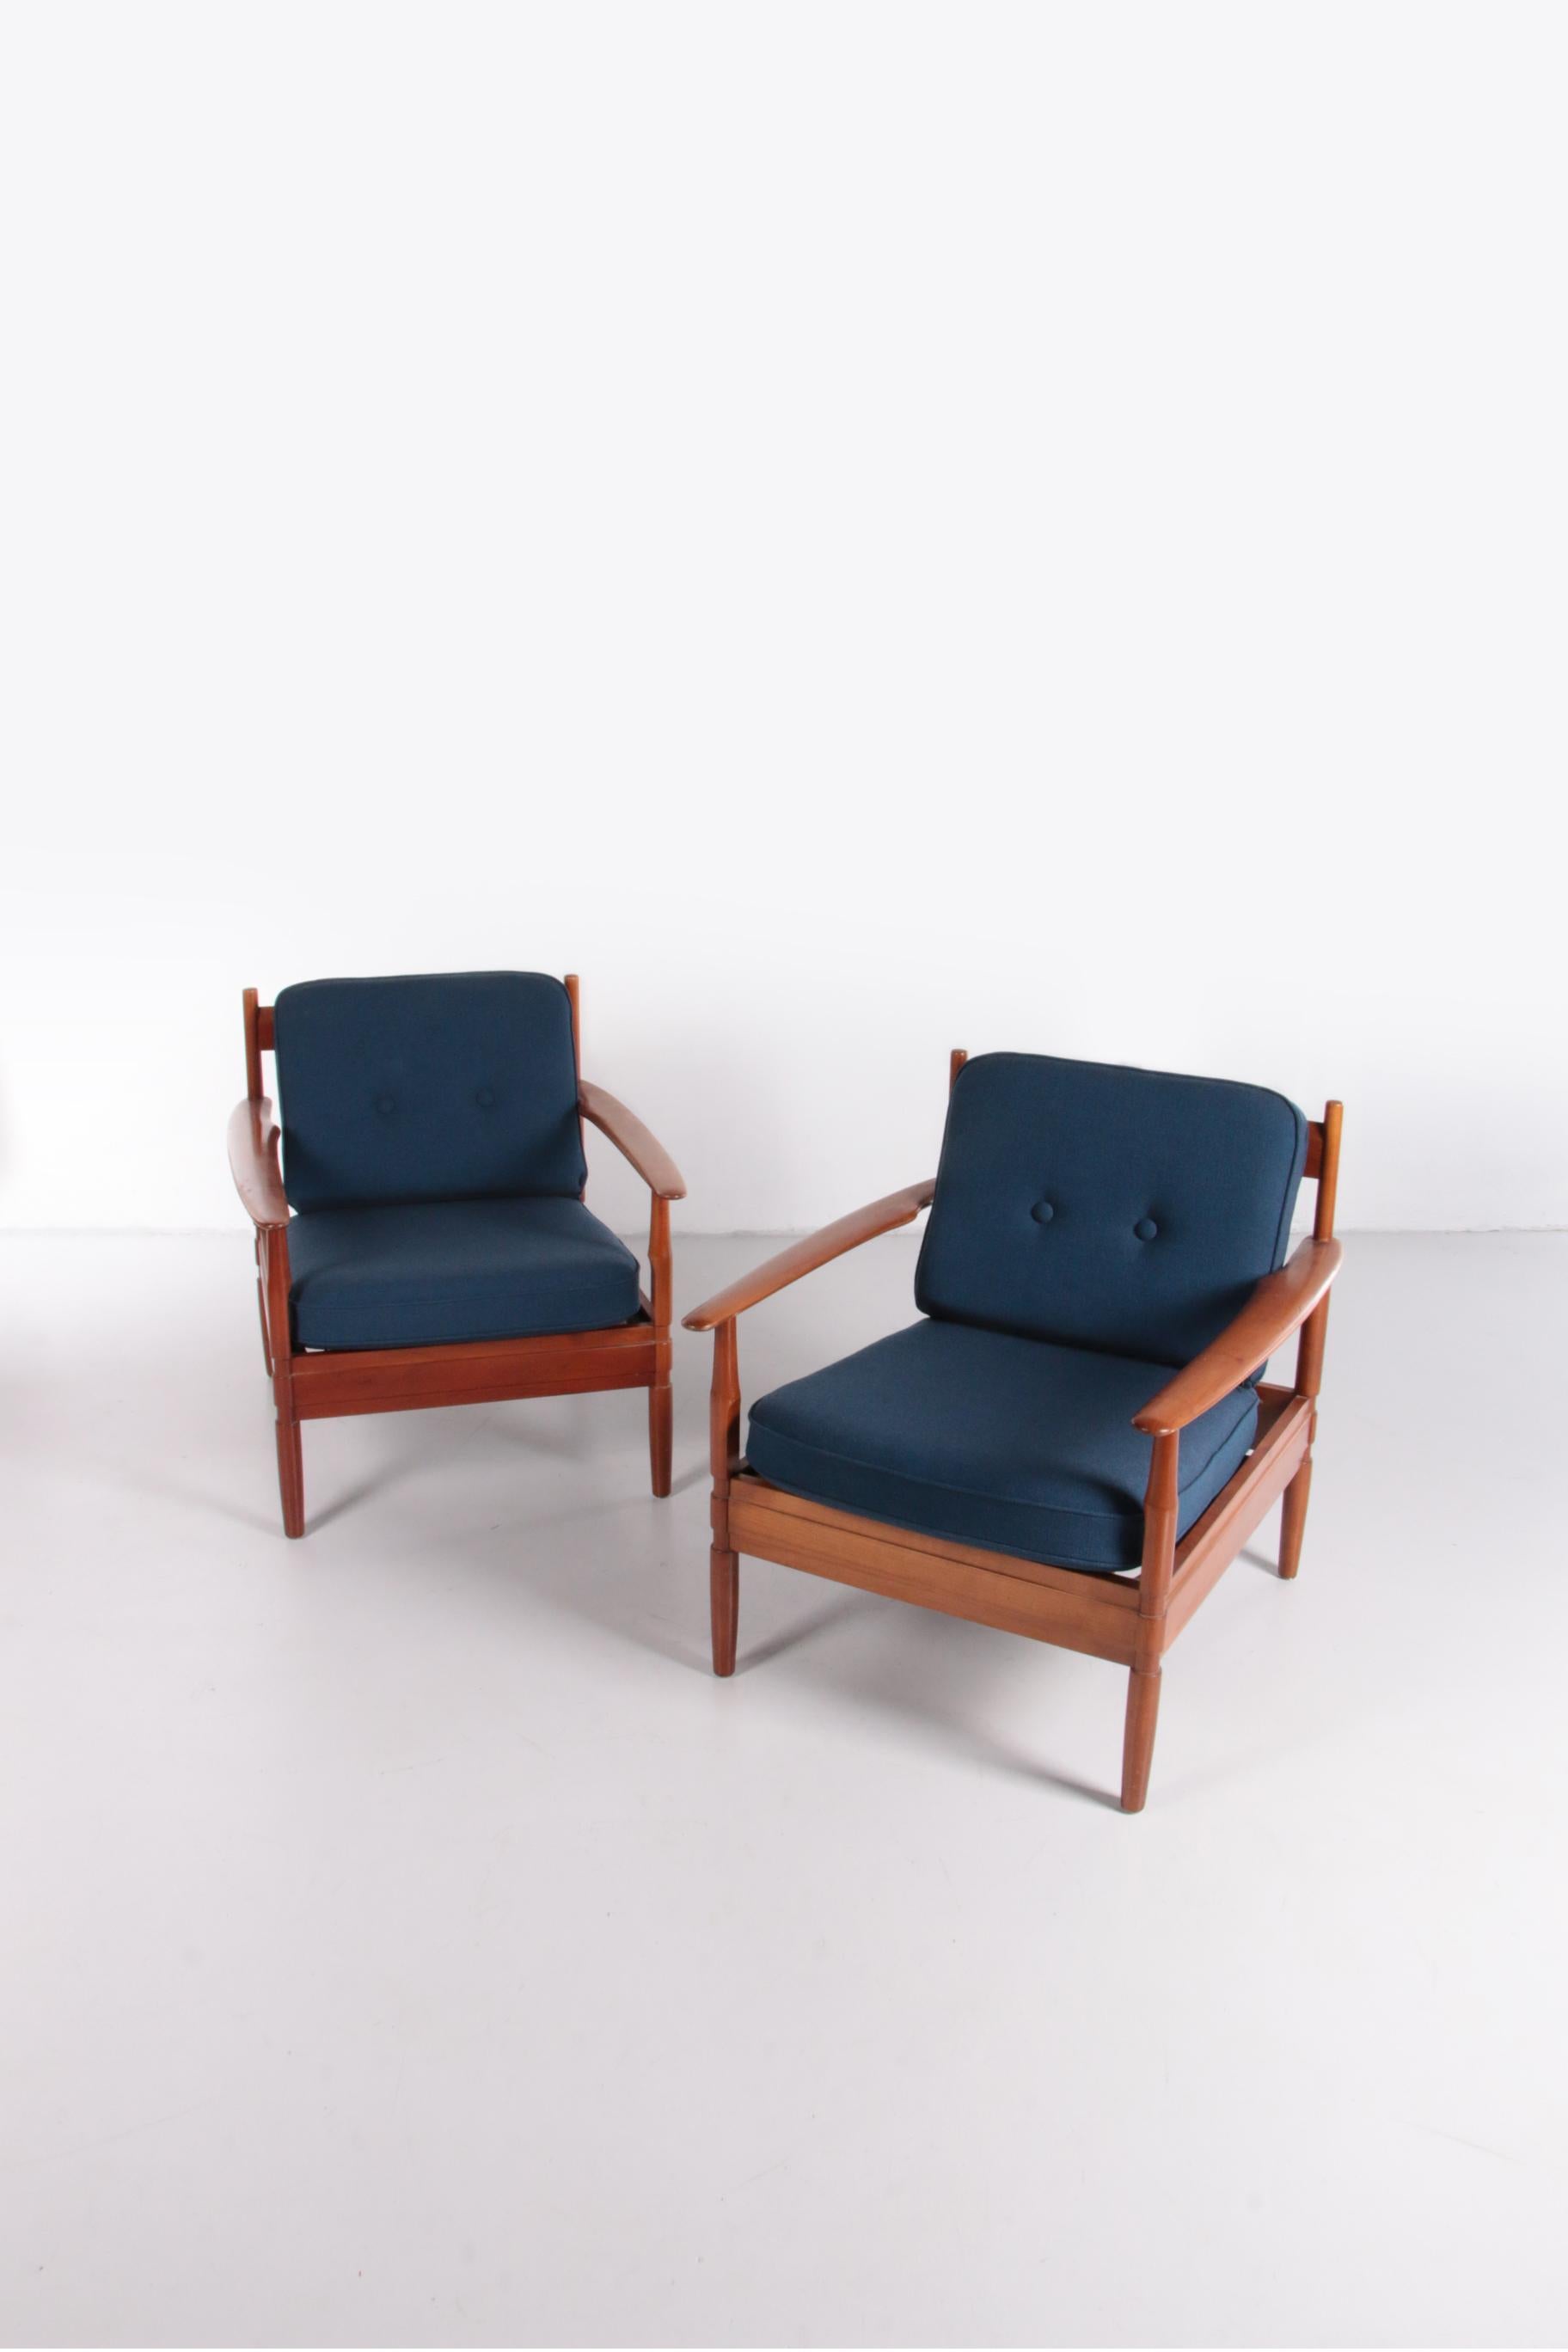 Vintage set of armchairs Grete Jalk made by France and Son,1960 Denmark.

Beautiful vintage teak wooden model 118 armchairs.

The armchair was designed by the Danish designer Grete Jalk and produced by France and Son. The frame is made of solid